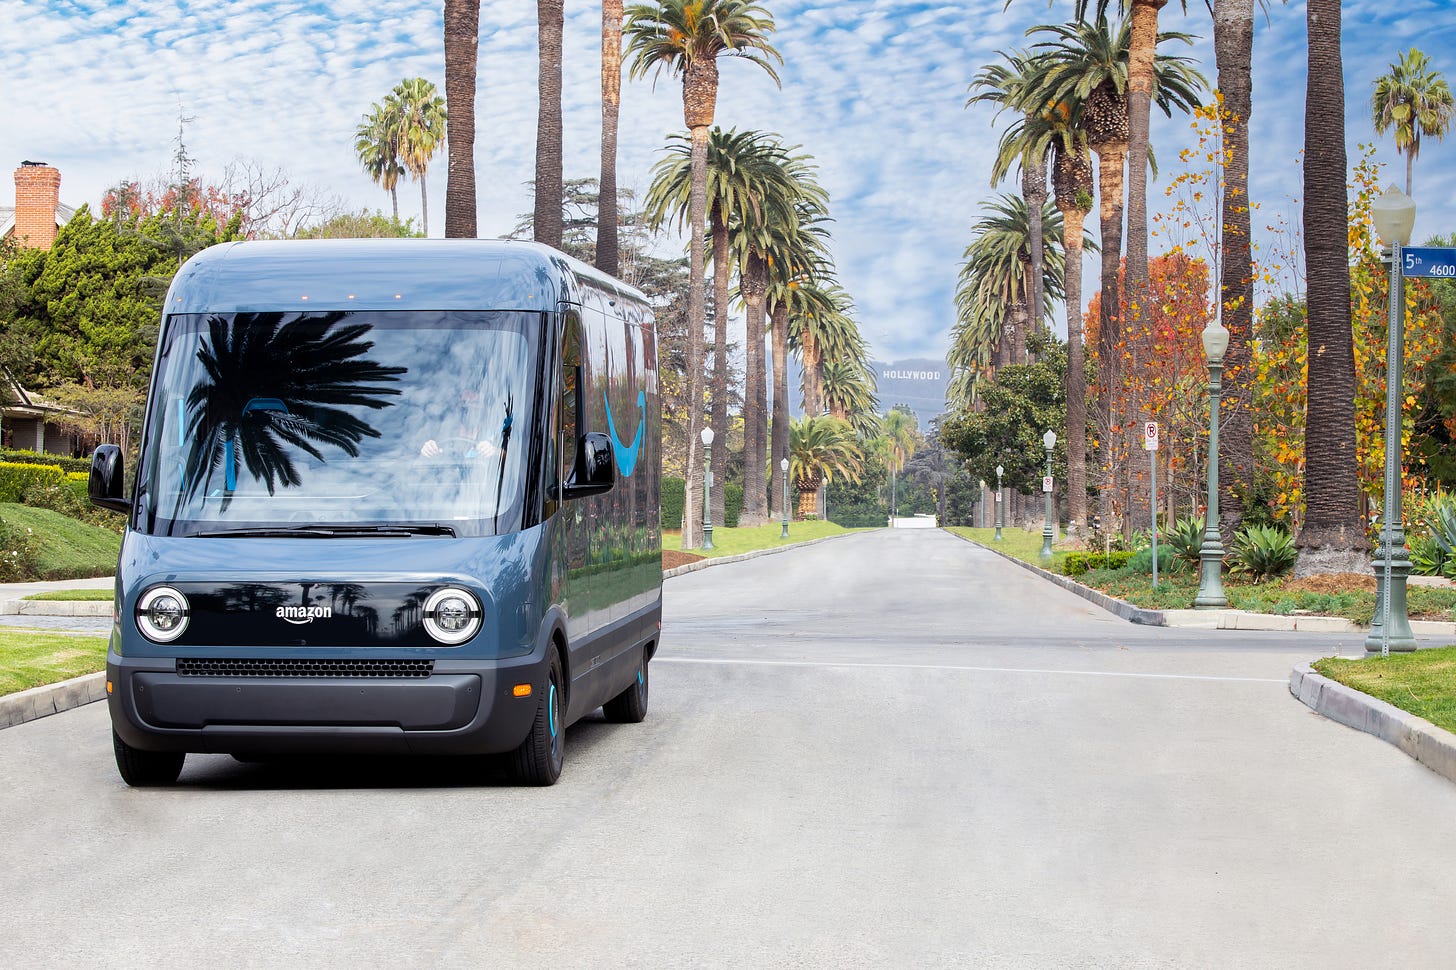 Amazon's custom electric delivery vehicles are starting to hit the road